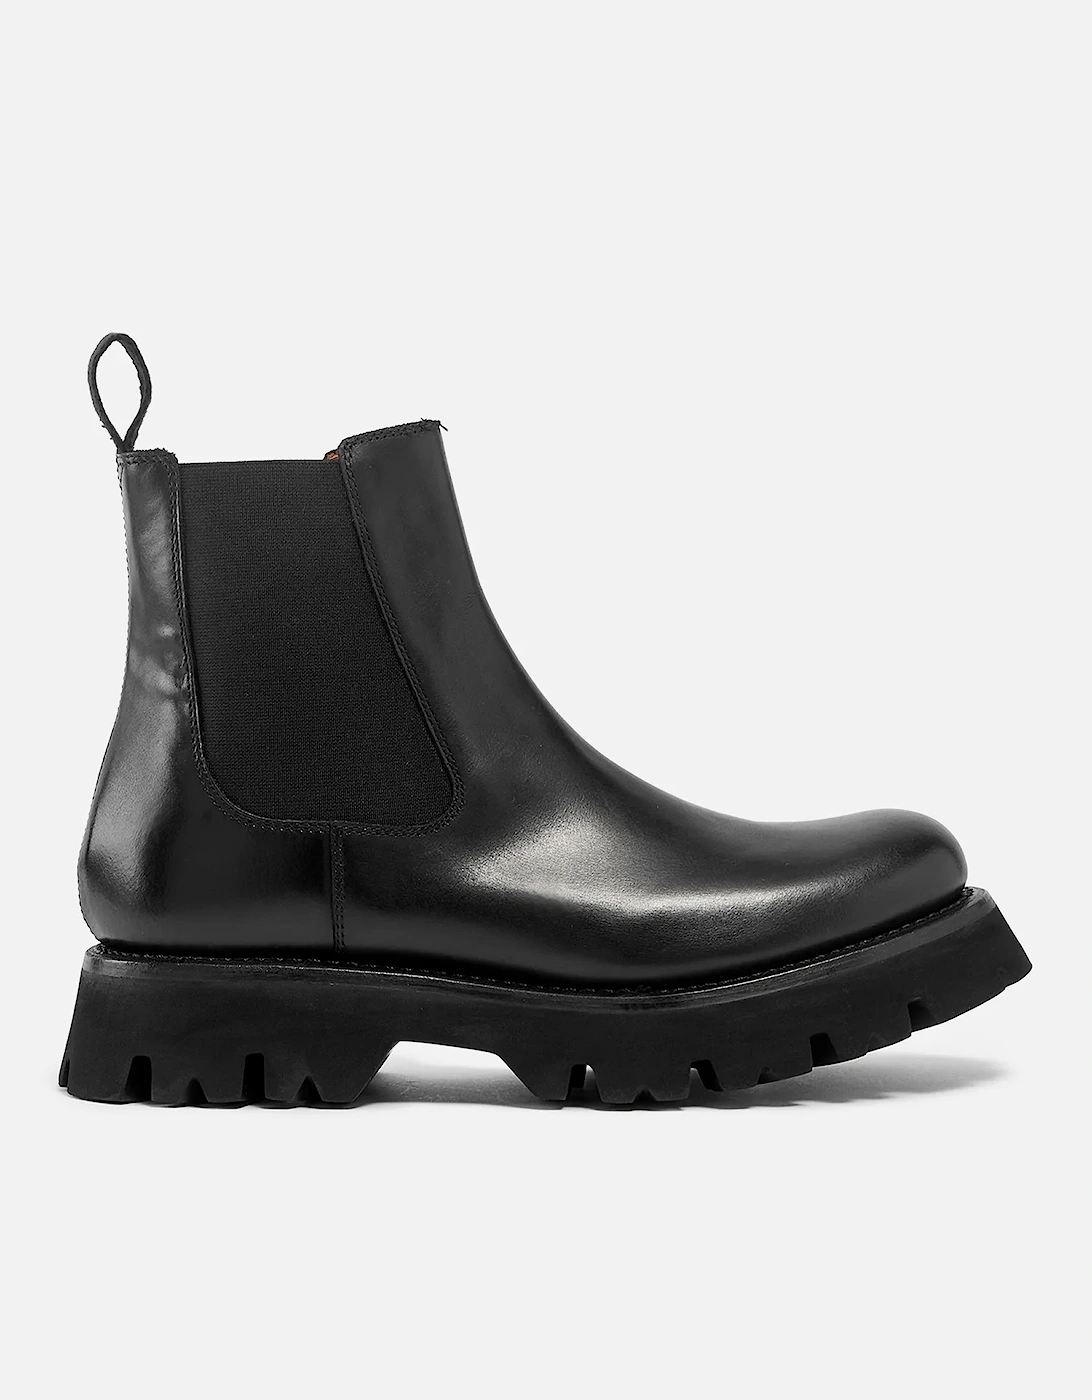 Harlow Leather Chelsea Boots - - Home - Women's Shoes - Women's Boots - Women's Chelsea Boots - Harlow Leather Chelsea Boots, 3 of 2